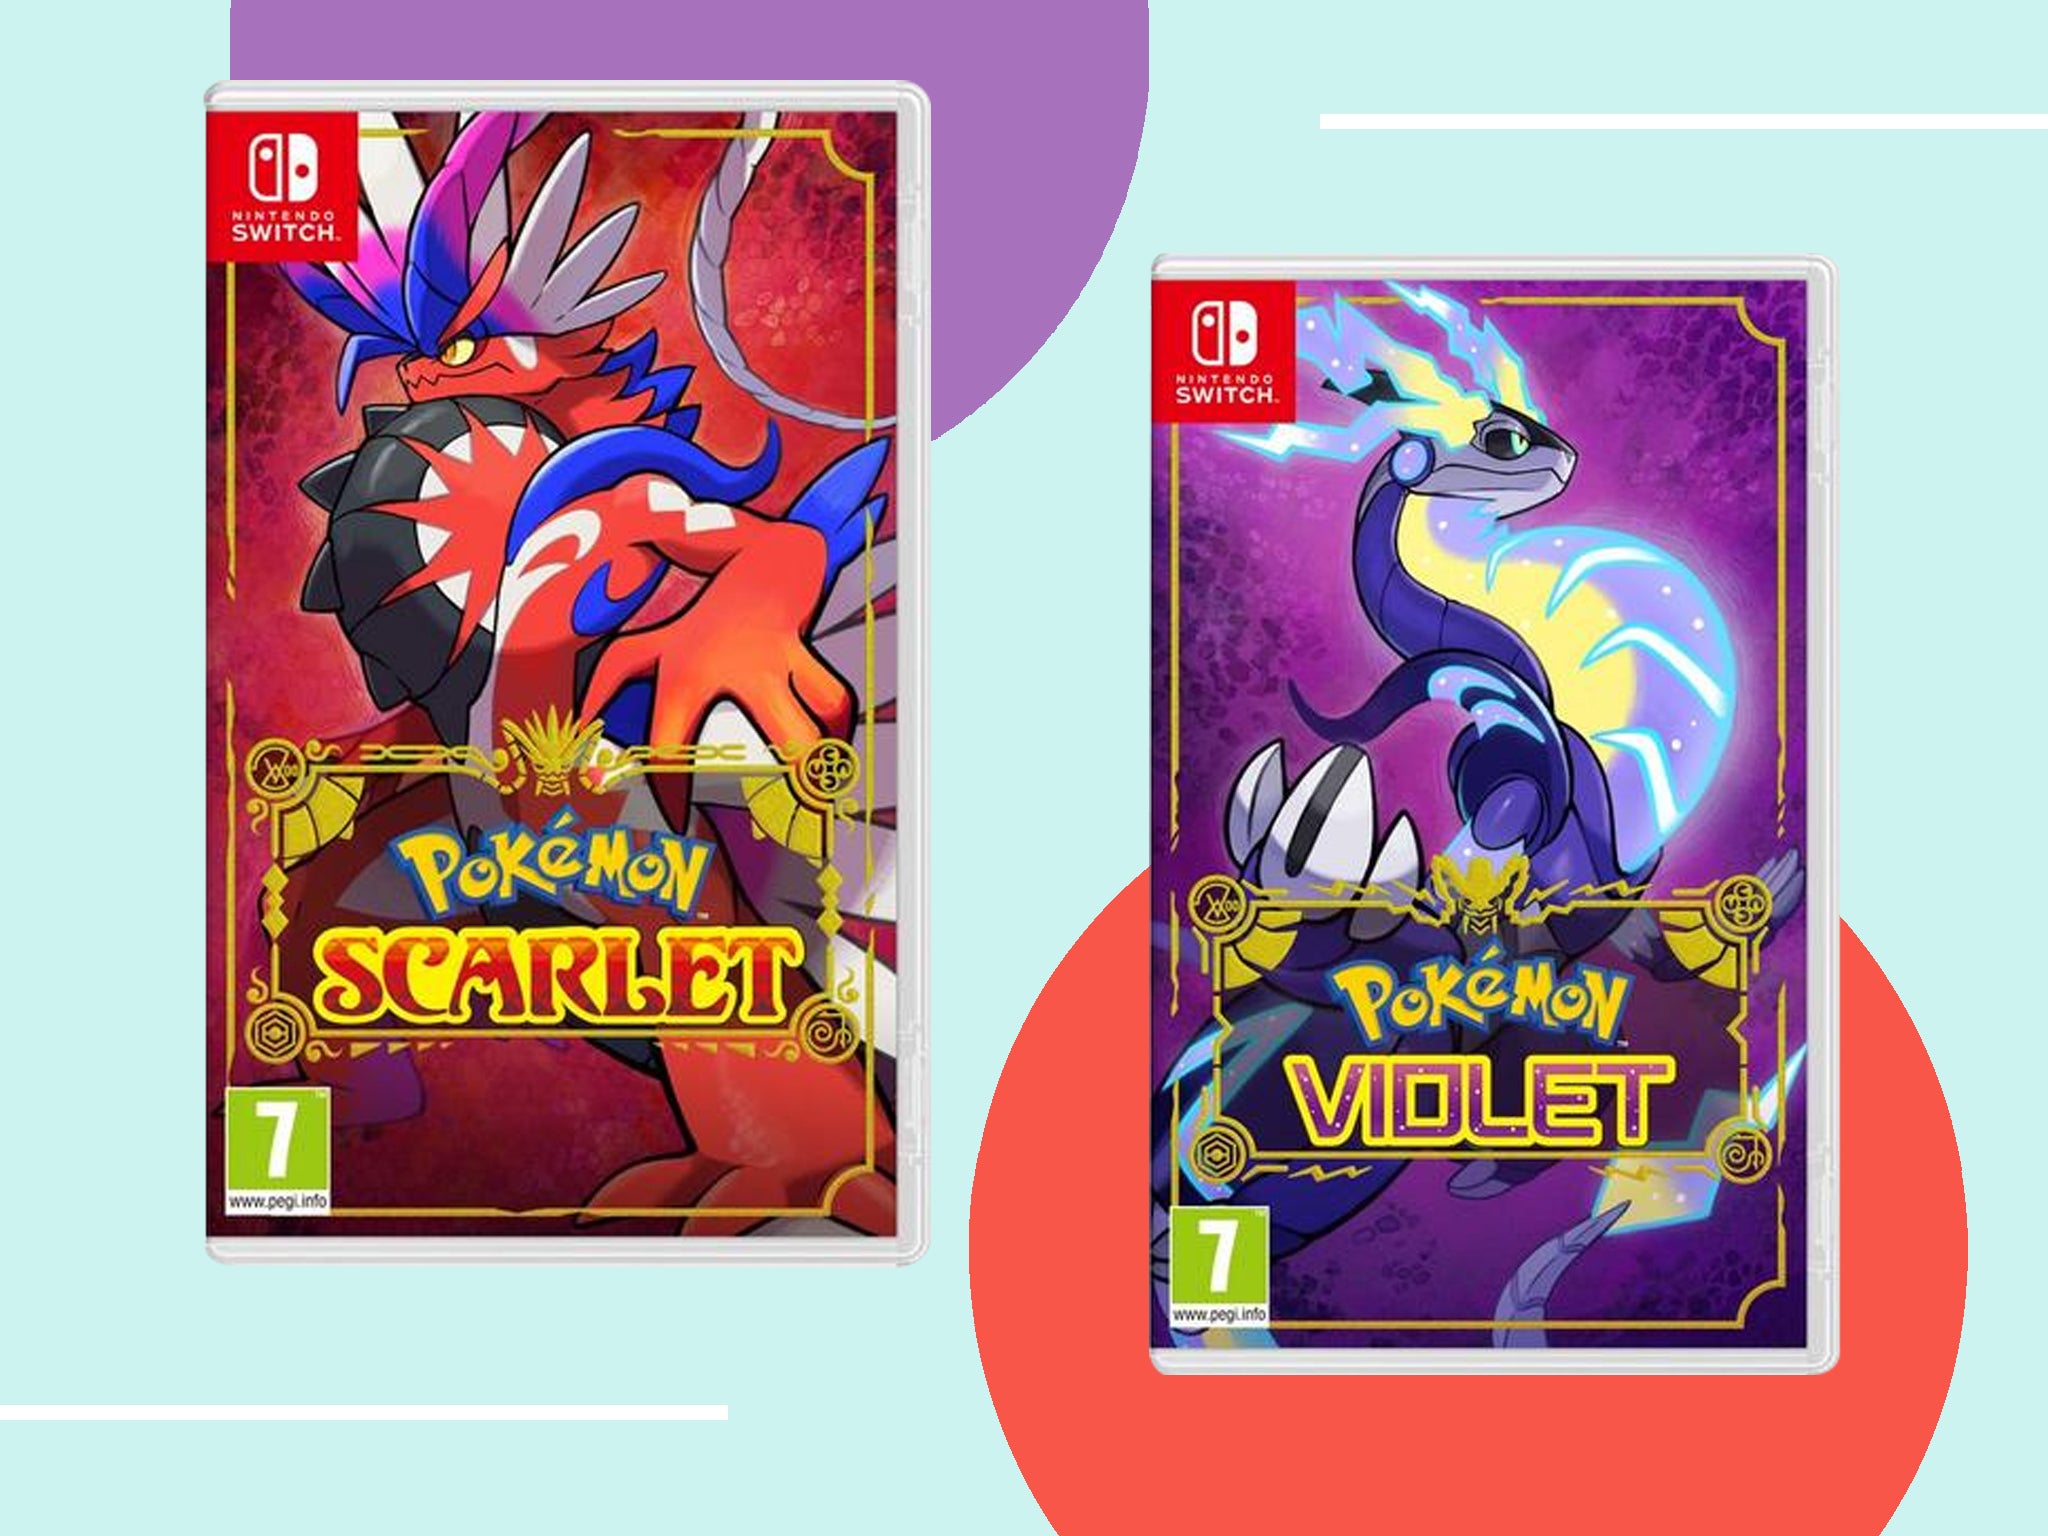 Pokemon Scarlet and Violet (for Nintendo Switch) Review